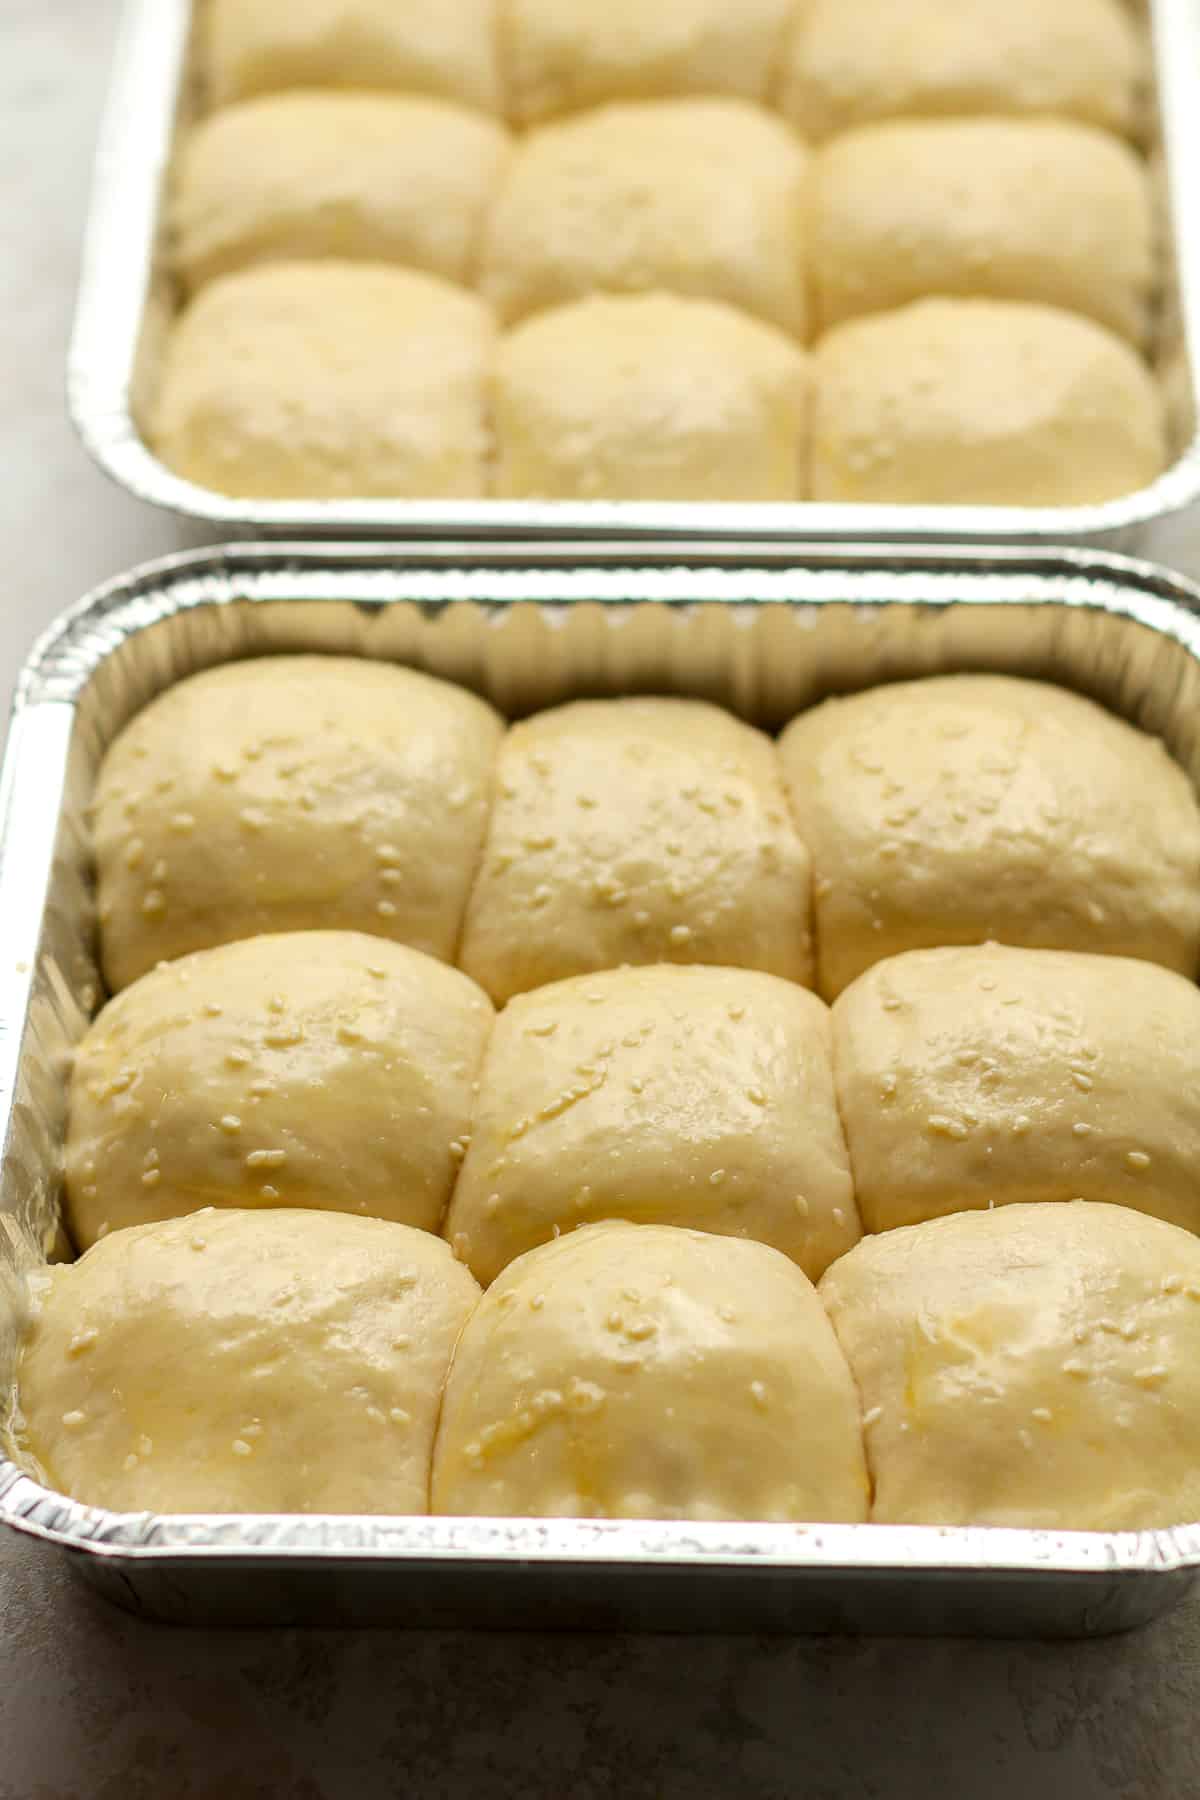 Side view of two pans of raised dinner rolls.